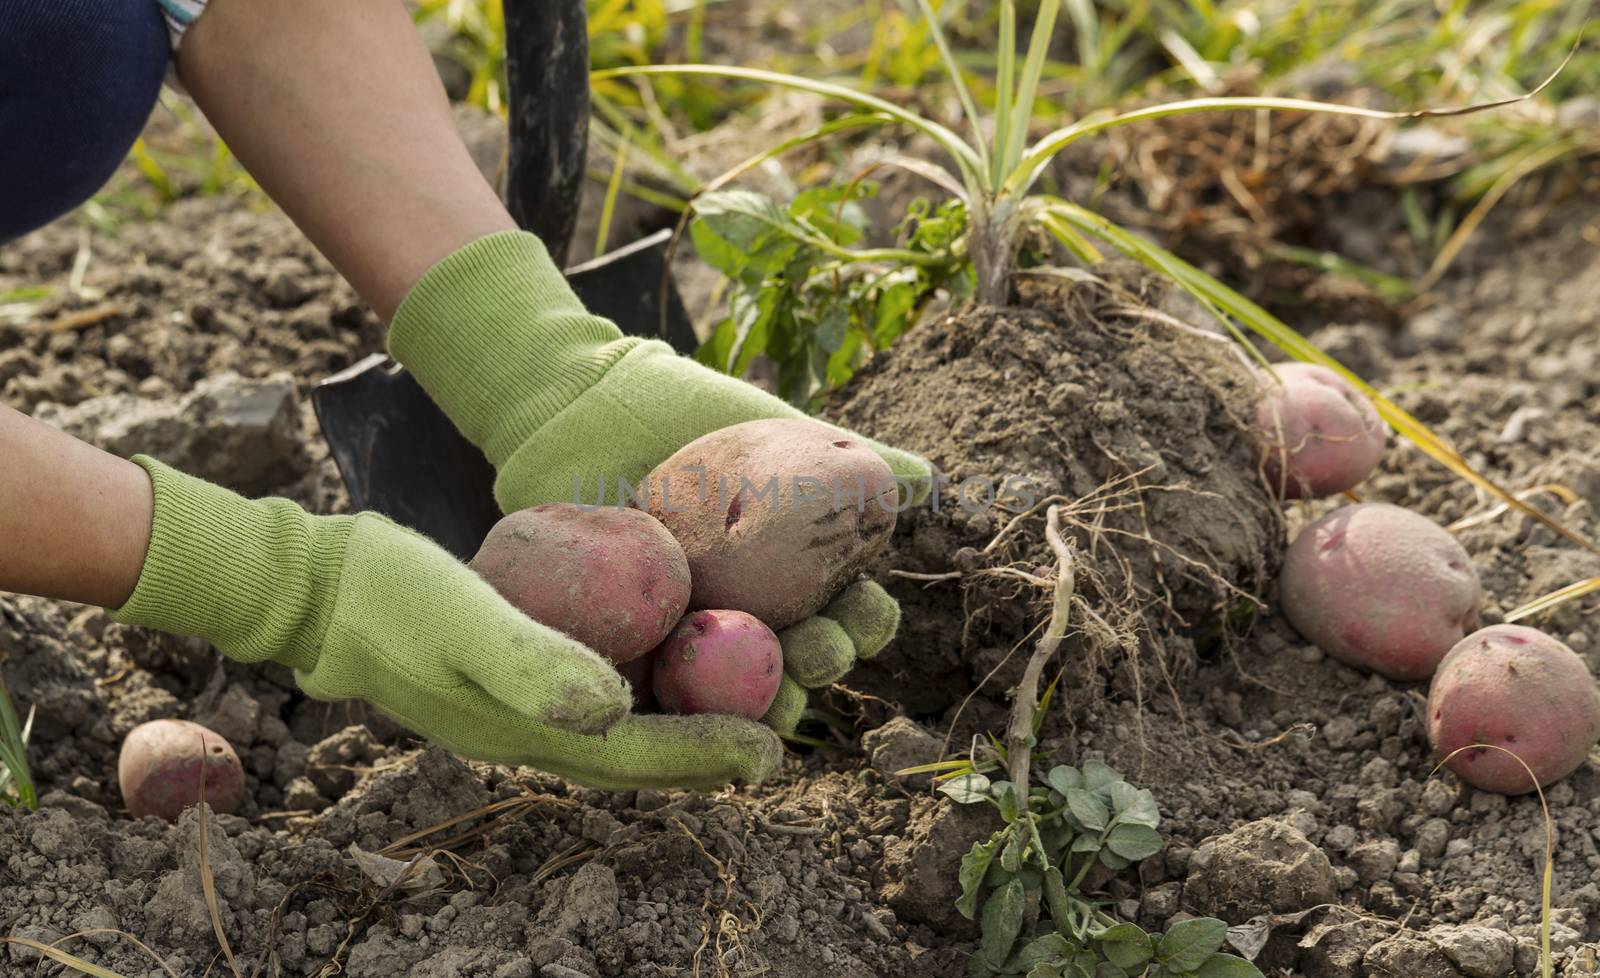 Working hands  holding fresh red potatoes from ground with shovel in background 